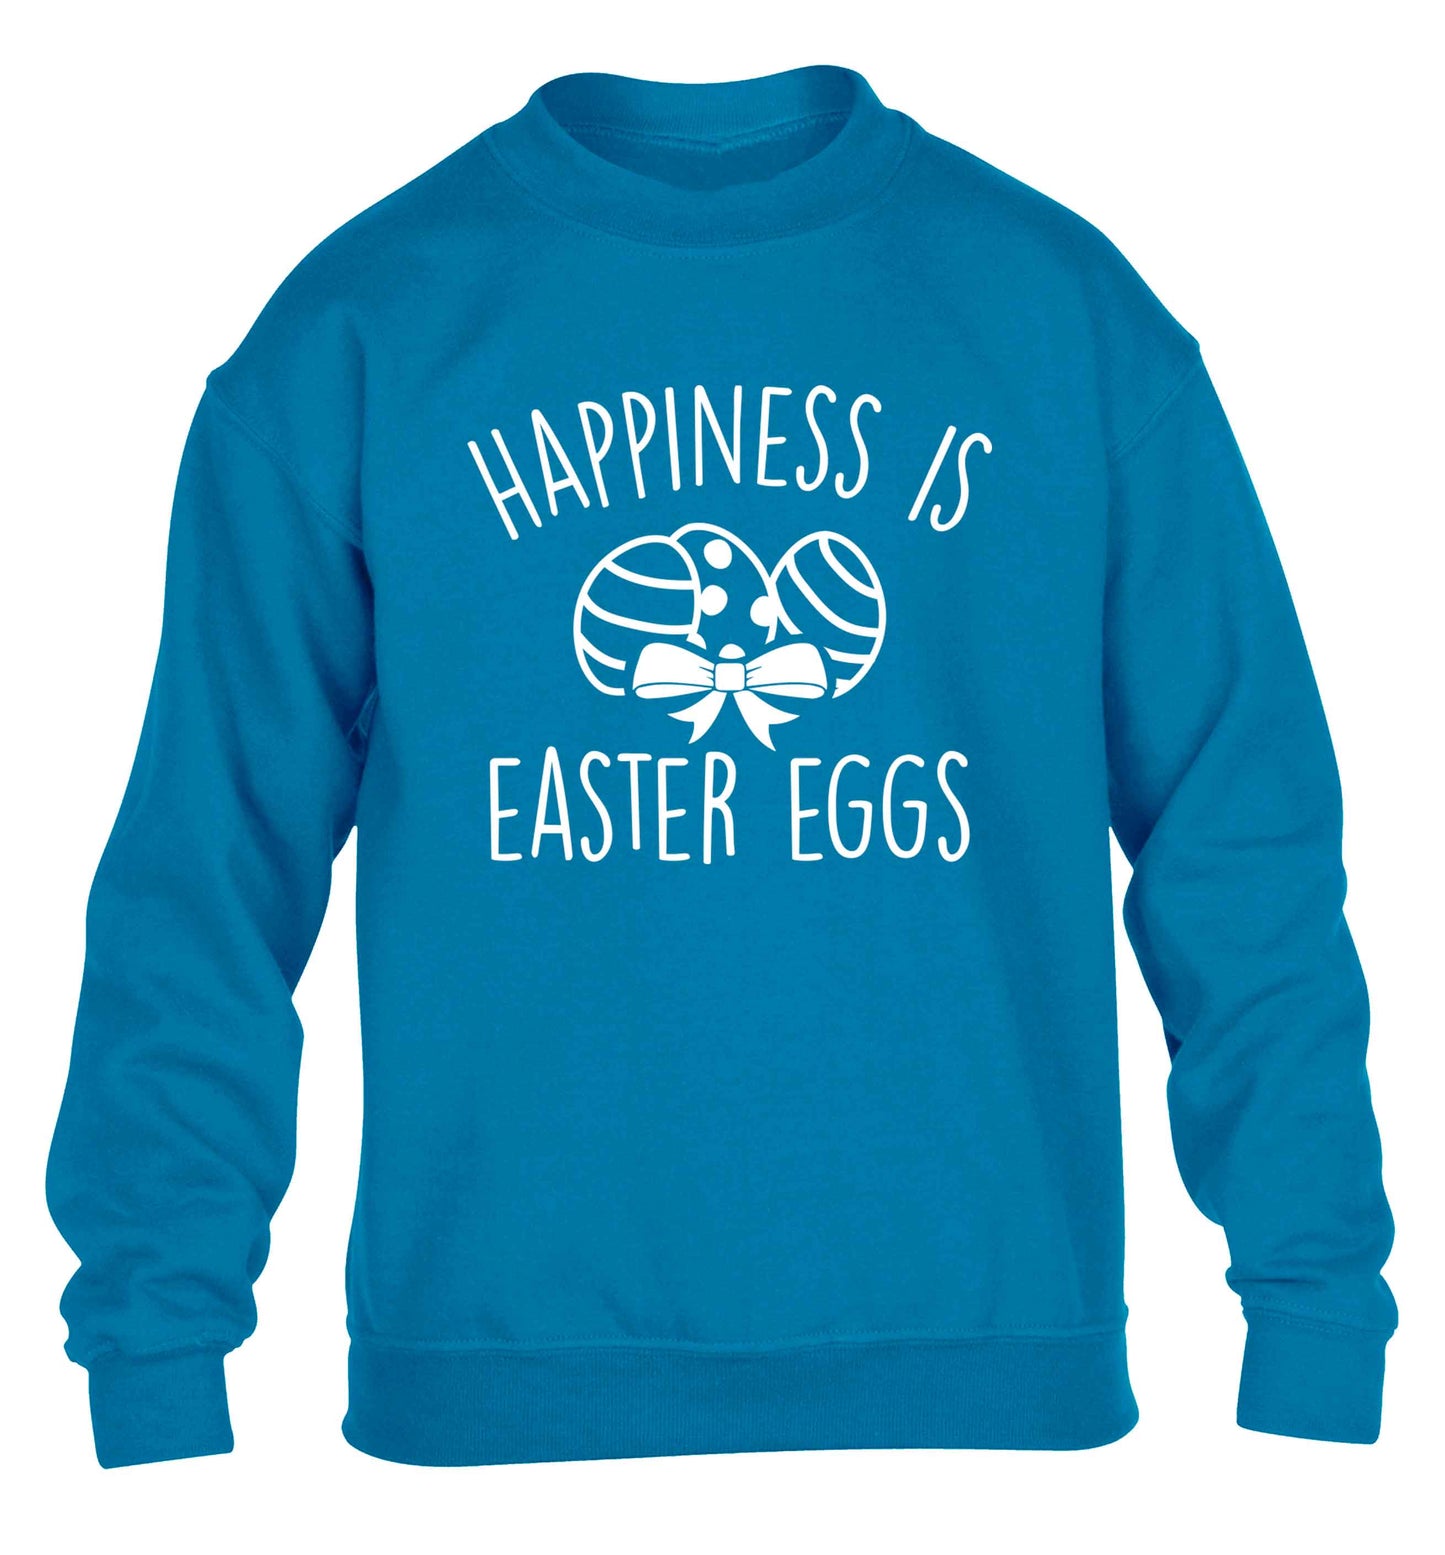 Happiness is Easter eggs children's blue sweater 12-13 Years